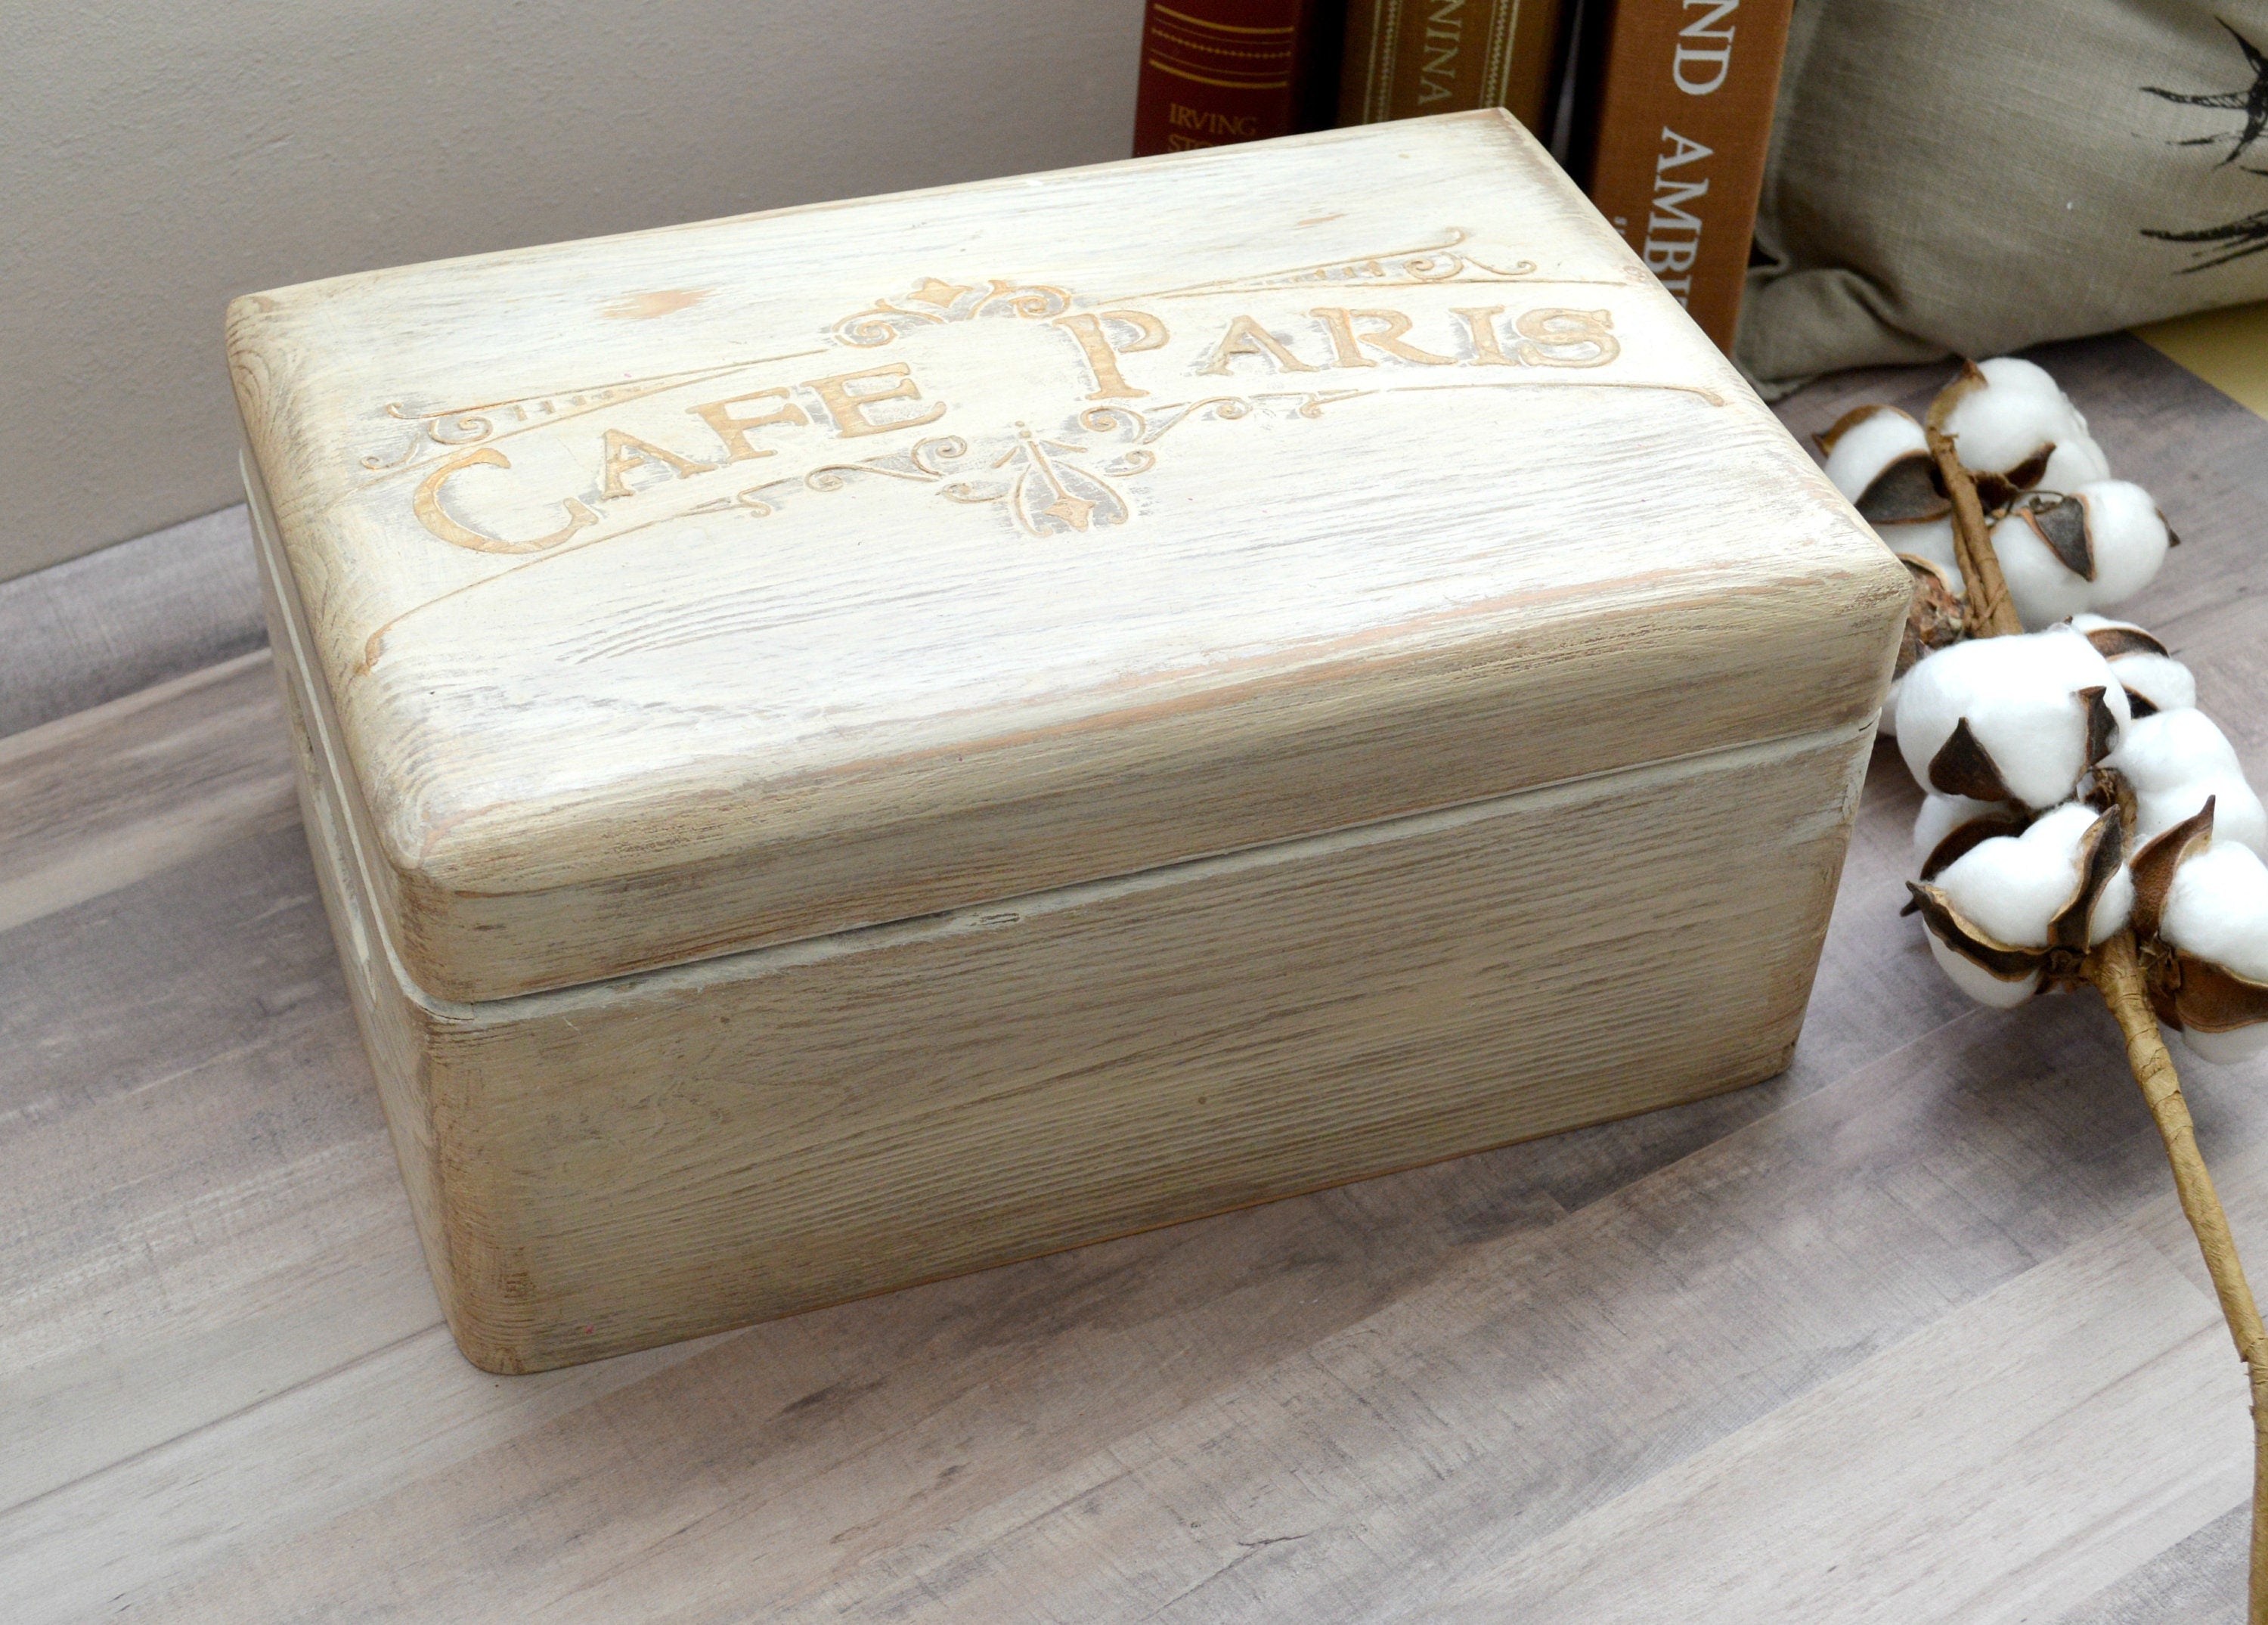 Create Your Own Gift for Local Hand Delivery, Wooden Gift Box